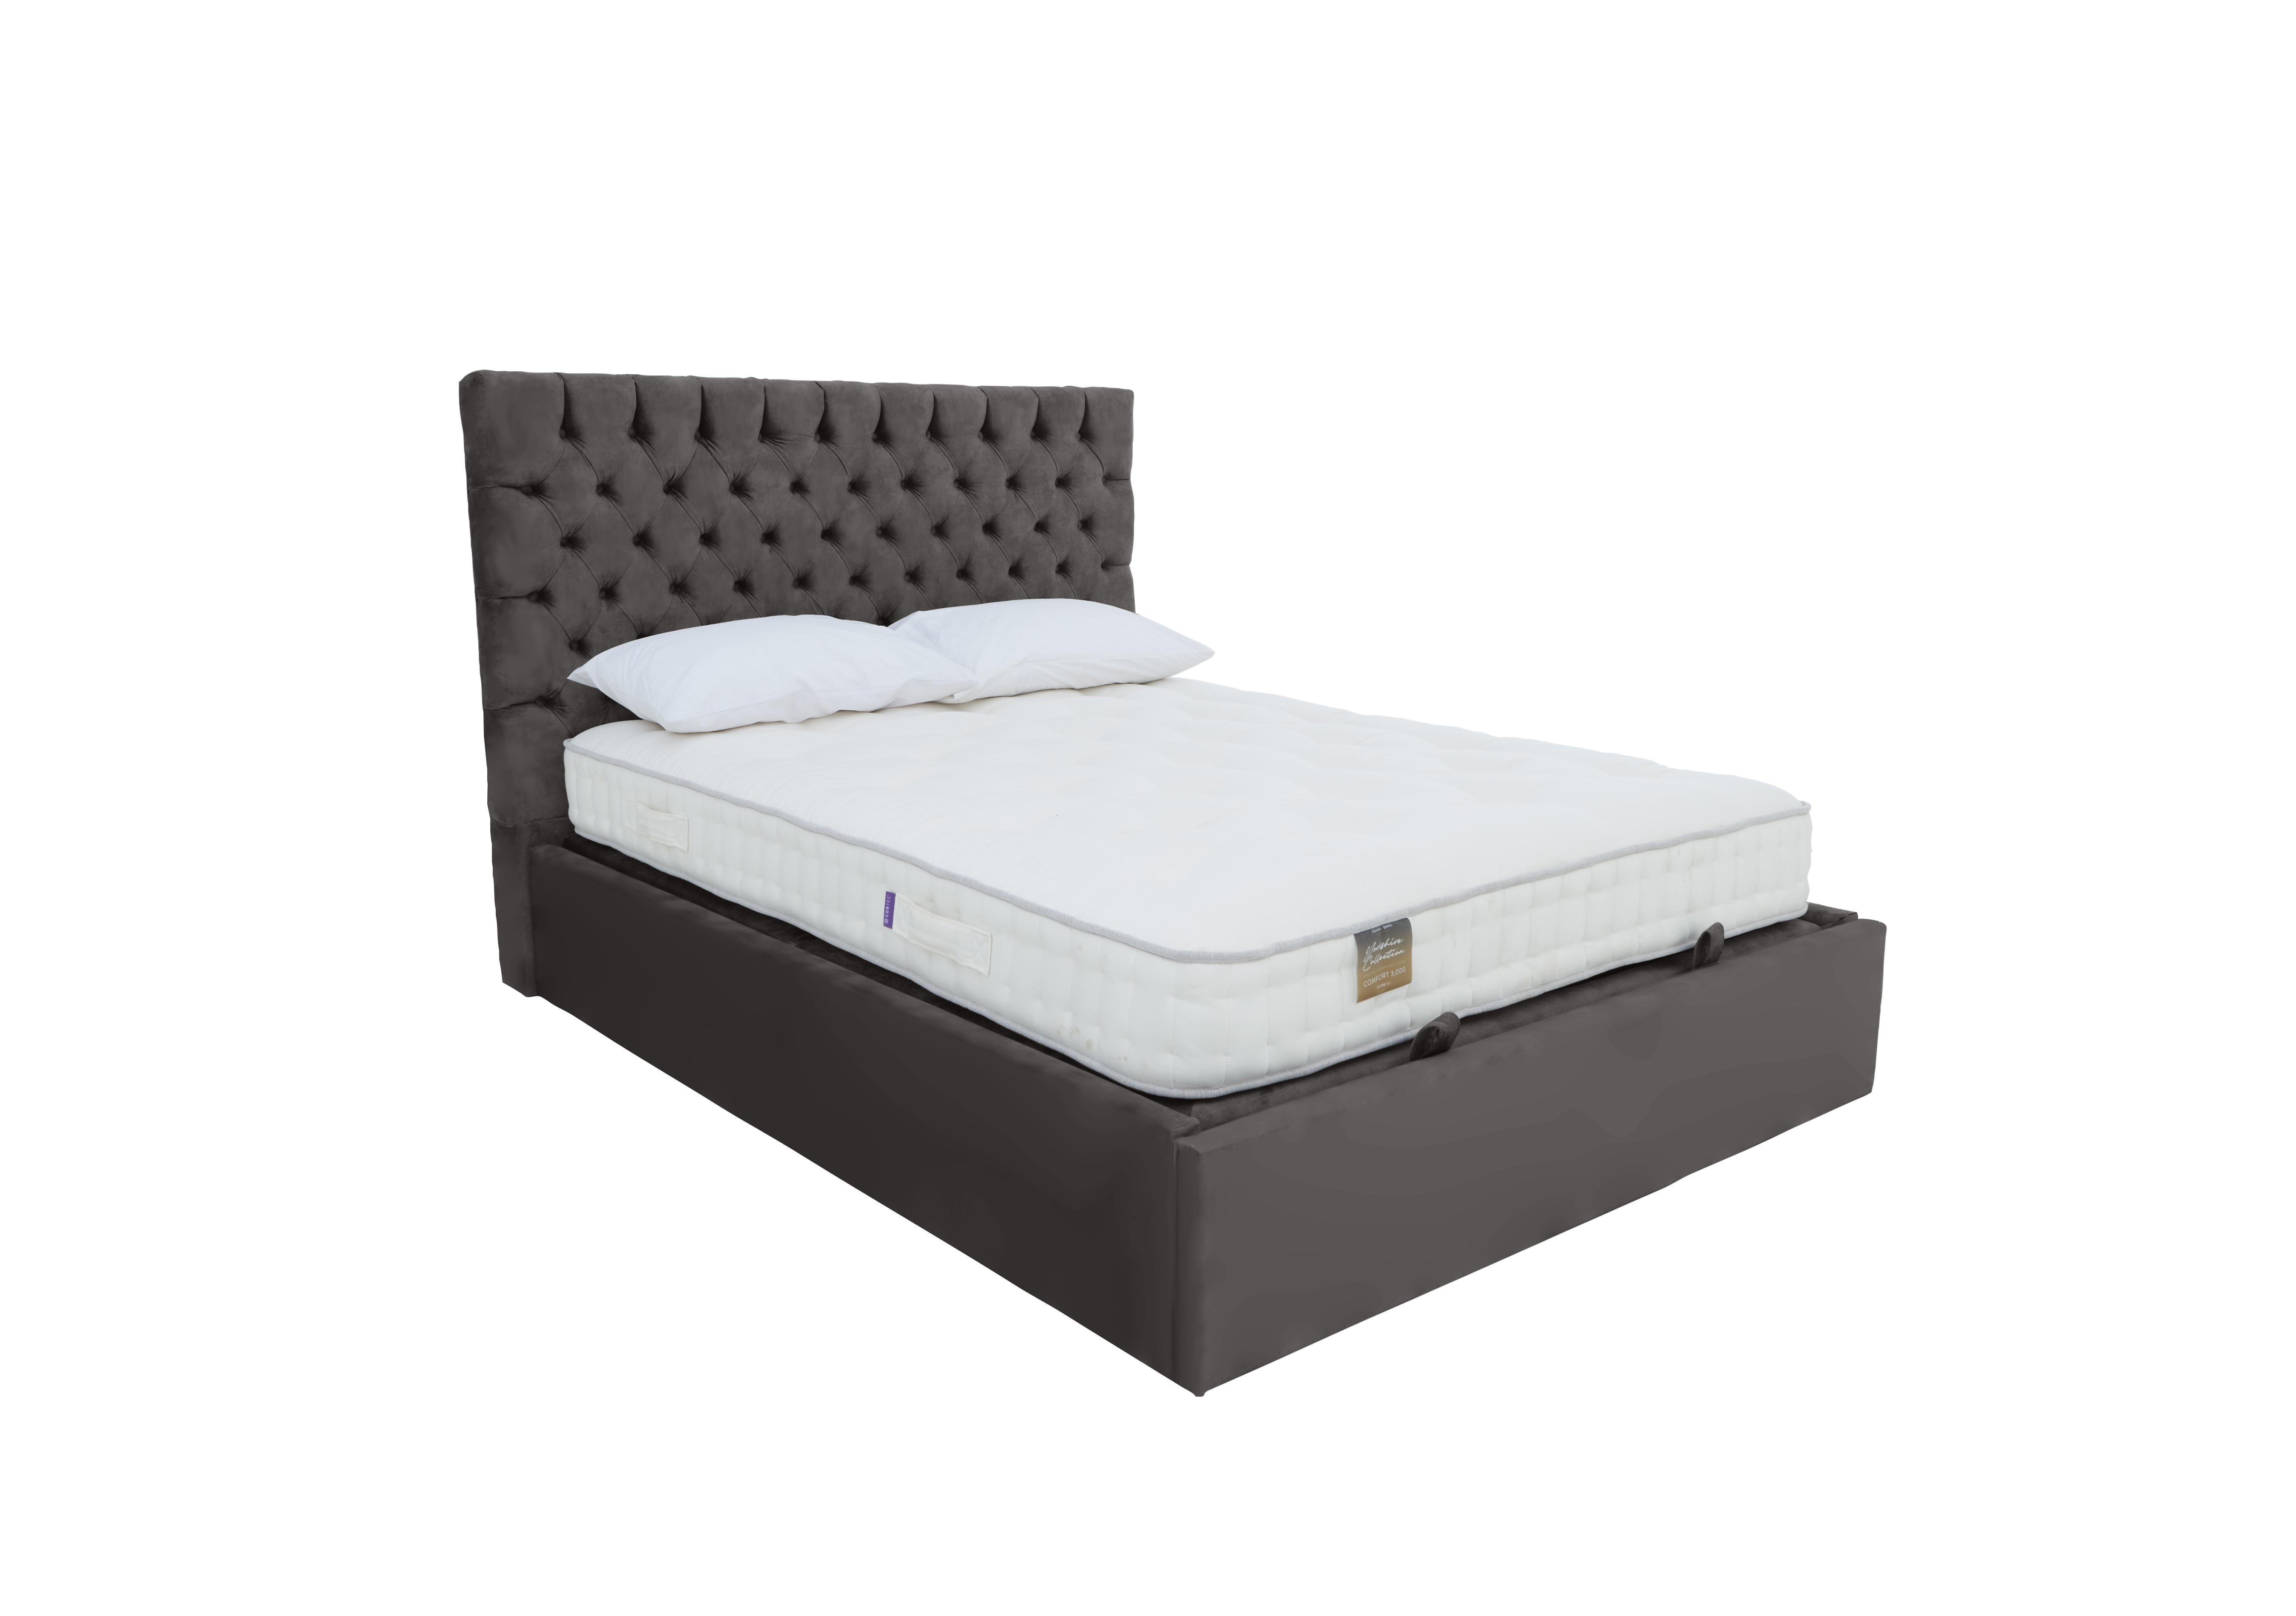 Sergio Ottoman Bed Frame in Krystal Charcoal on Furniture Village